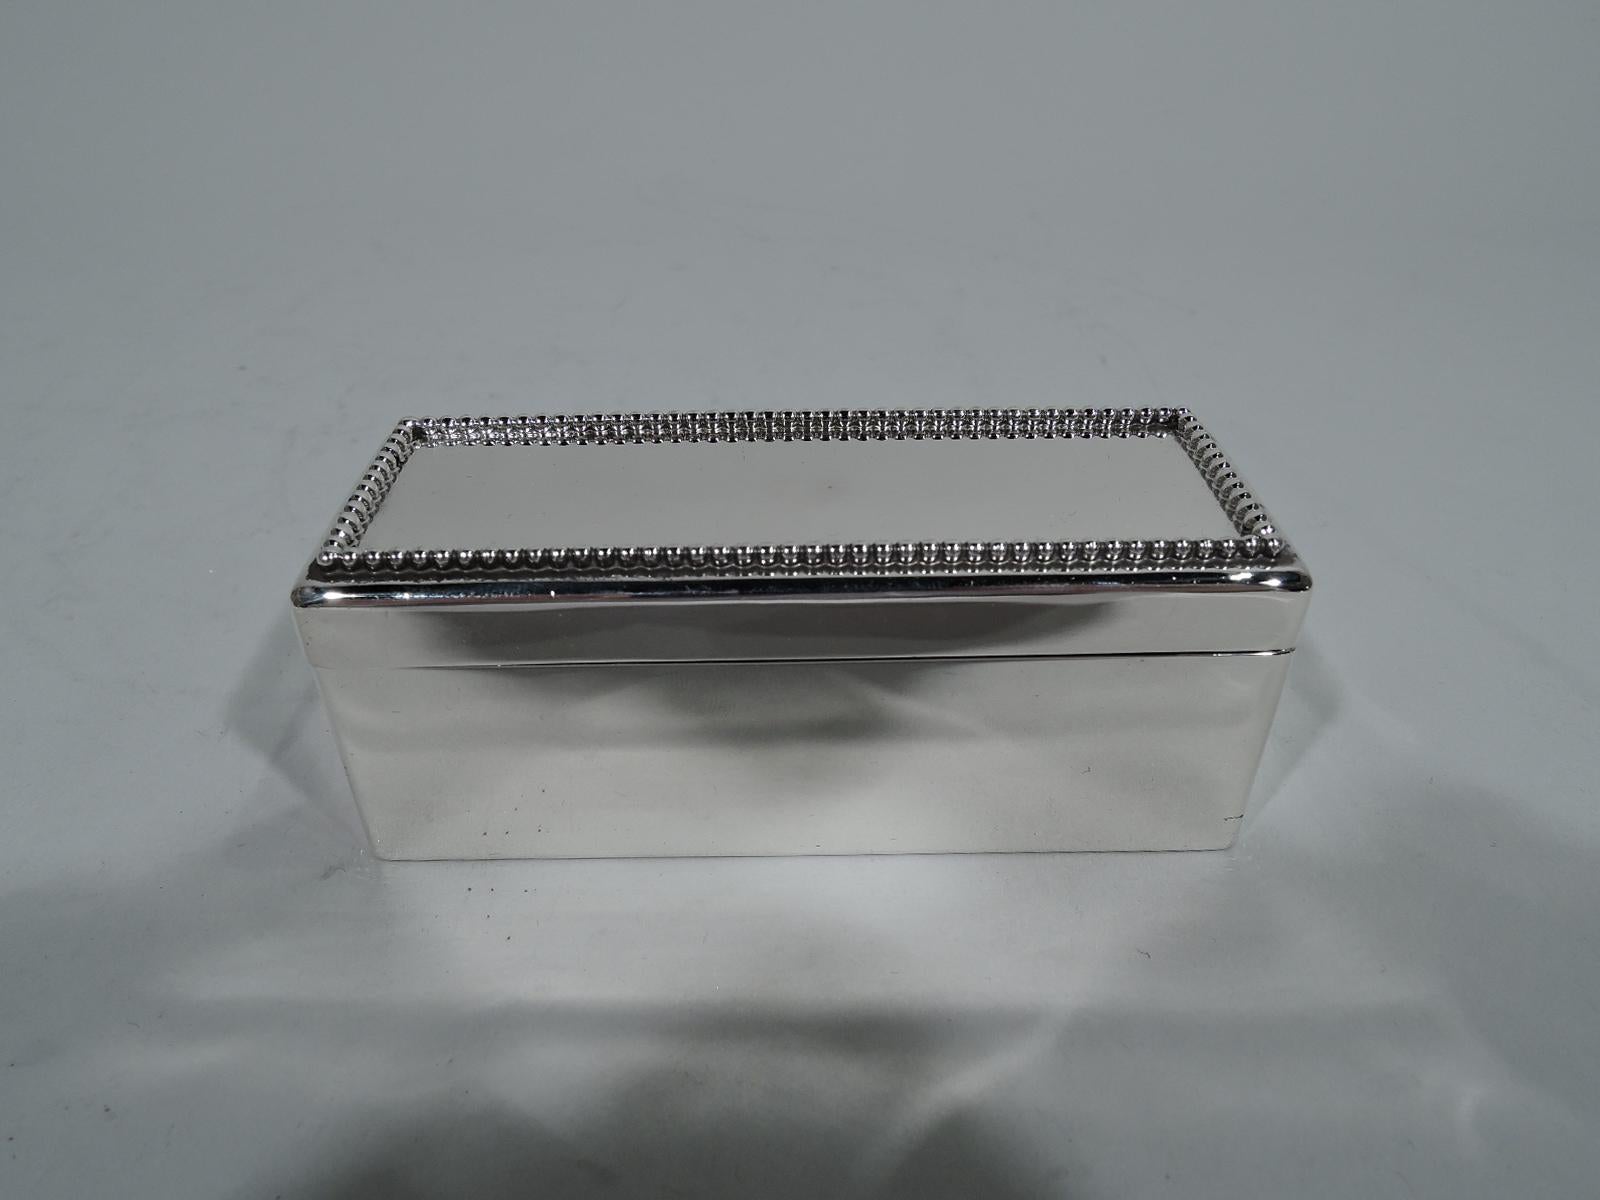 Smart sterling silver trinket box. Made by Gorham in Providence in 1899. Rectangular with straight sides and well-defined corners. Cover has inset beaded border. Interior gilt washed. Hallmark includes date symbol and no. 9396. Weight: 4 troy ounces.